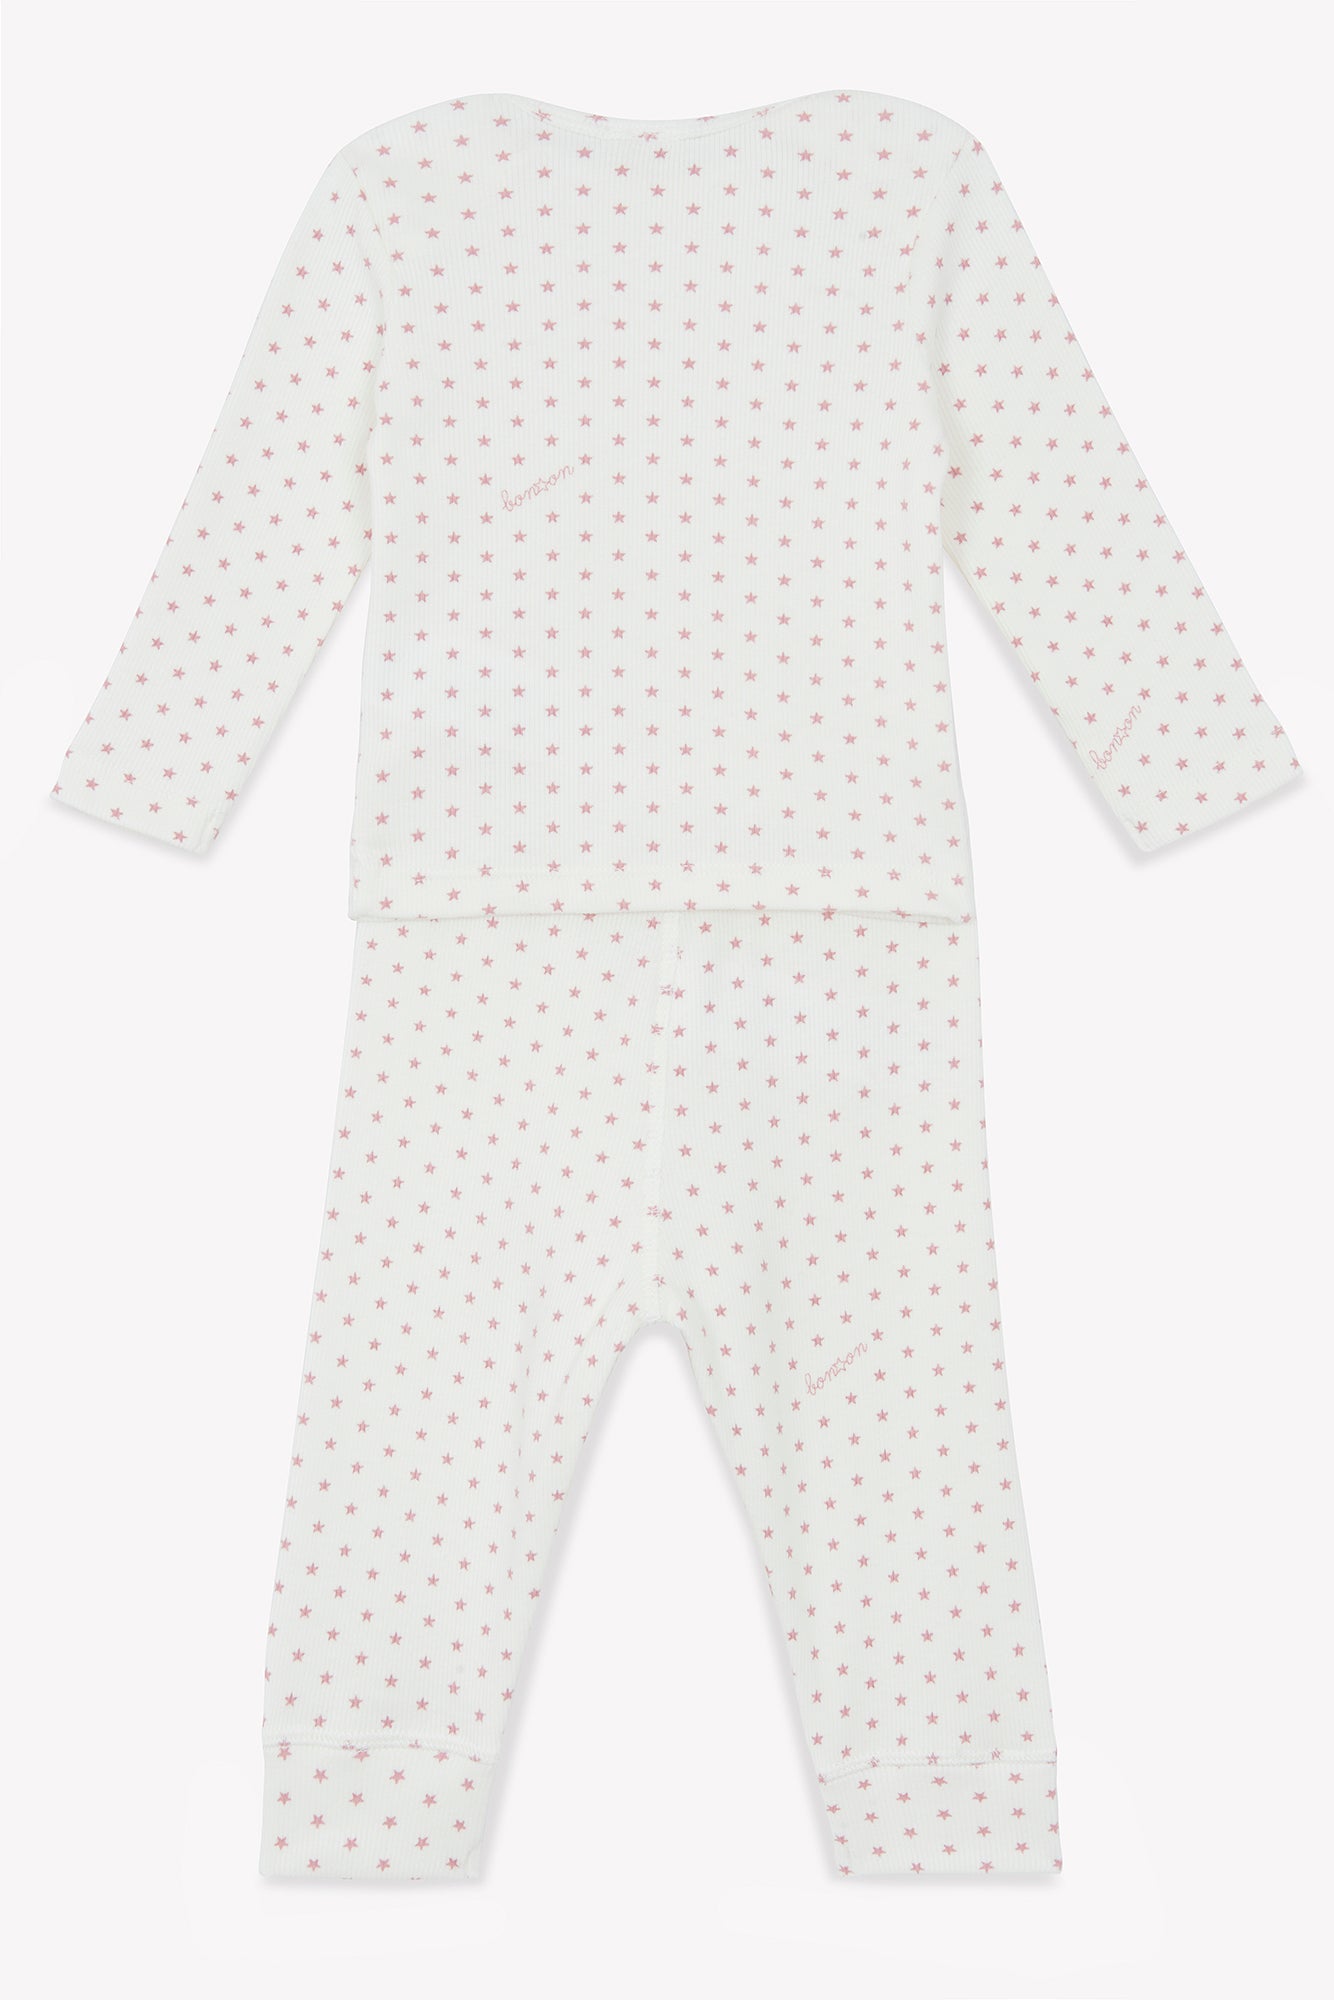 Outfit Pajamas 2 rooms Pink Baby in cotton Print stars